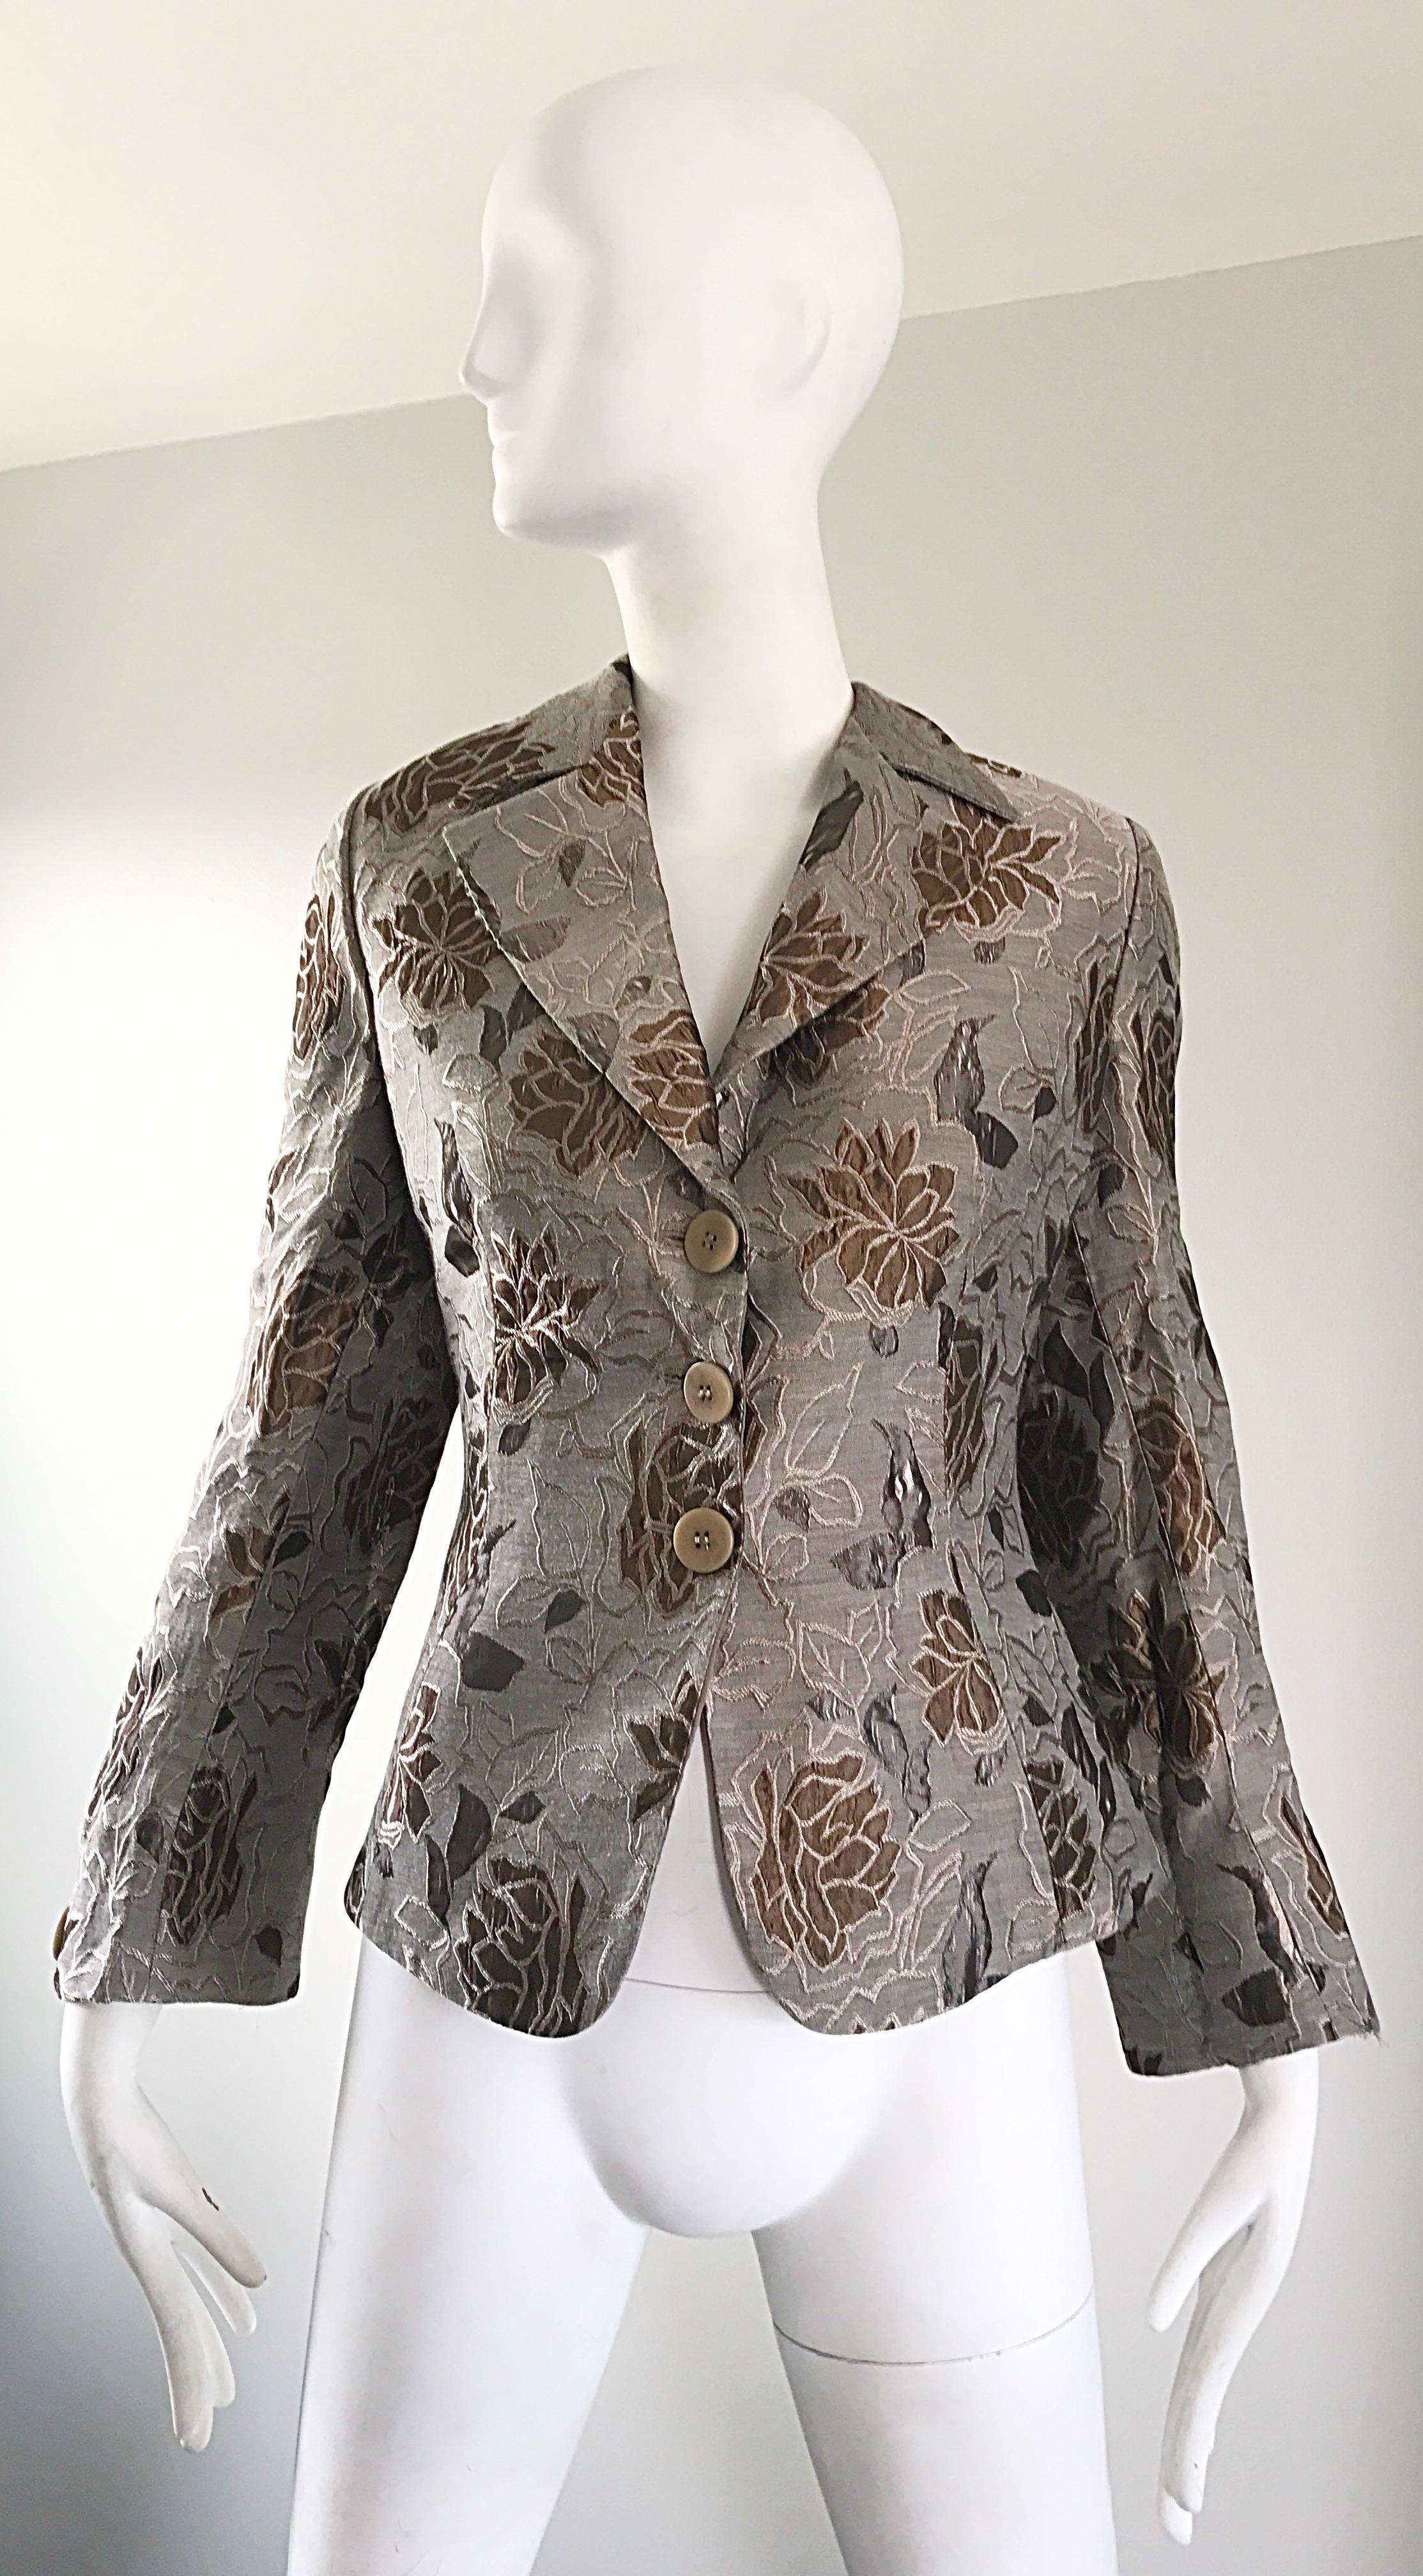 Beautiful 1990s GIORGIO ARMANI COLLEZIONI gray, taupe and brown silk blazer jacket! Features a muted flower scene is warm hues. Three buttons up the front. Fully lined. Sleek tailored fit. Beautiful silk that gives off the slightest, yet wonderful